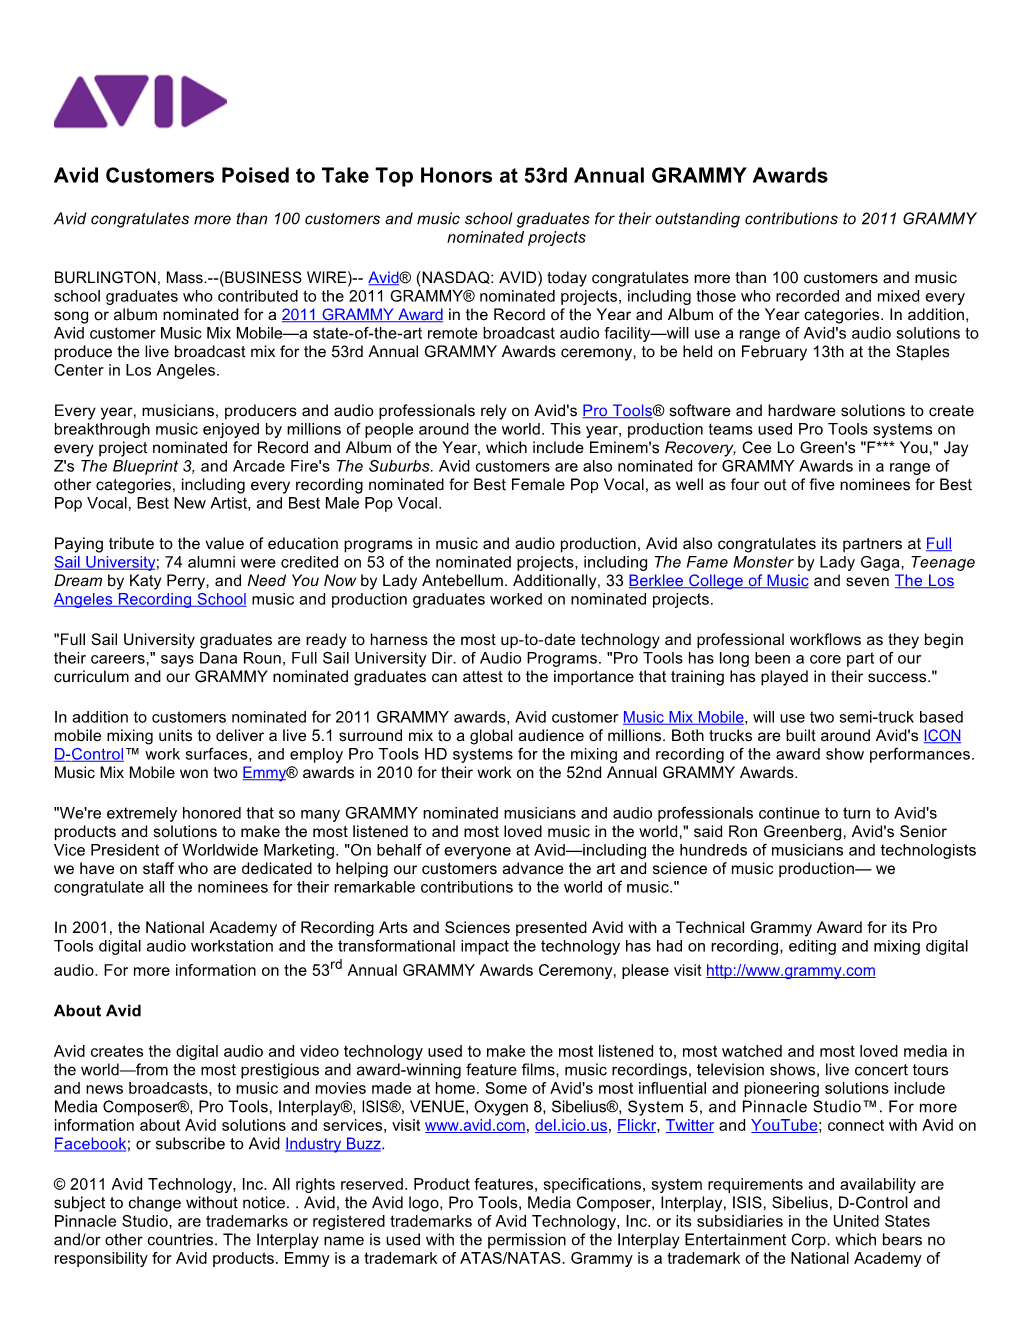 Avid Customers Poised to Take Top Honors at 53Rd Annual GRAMMY Awards